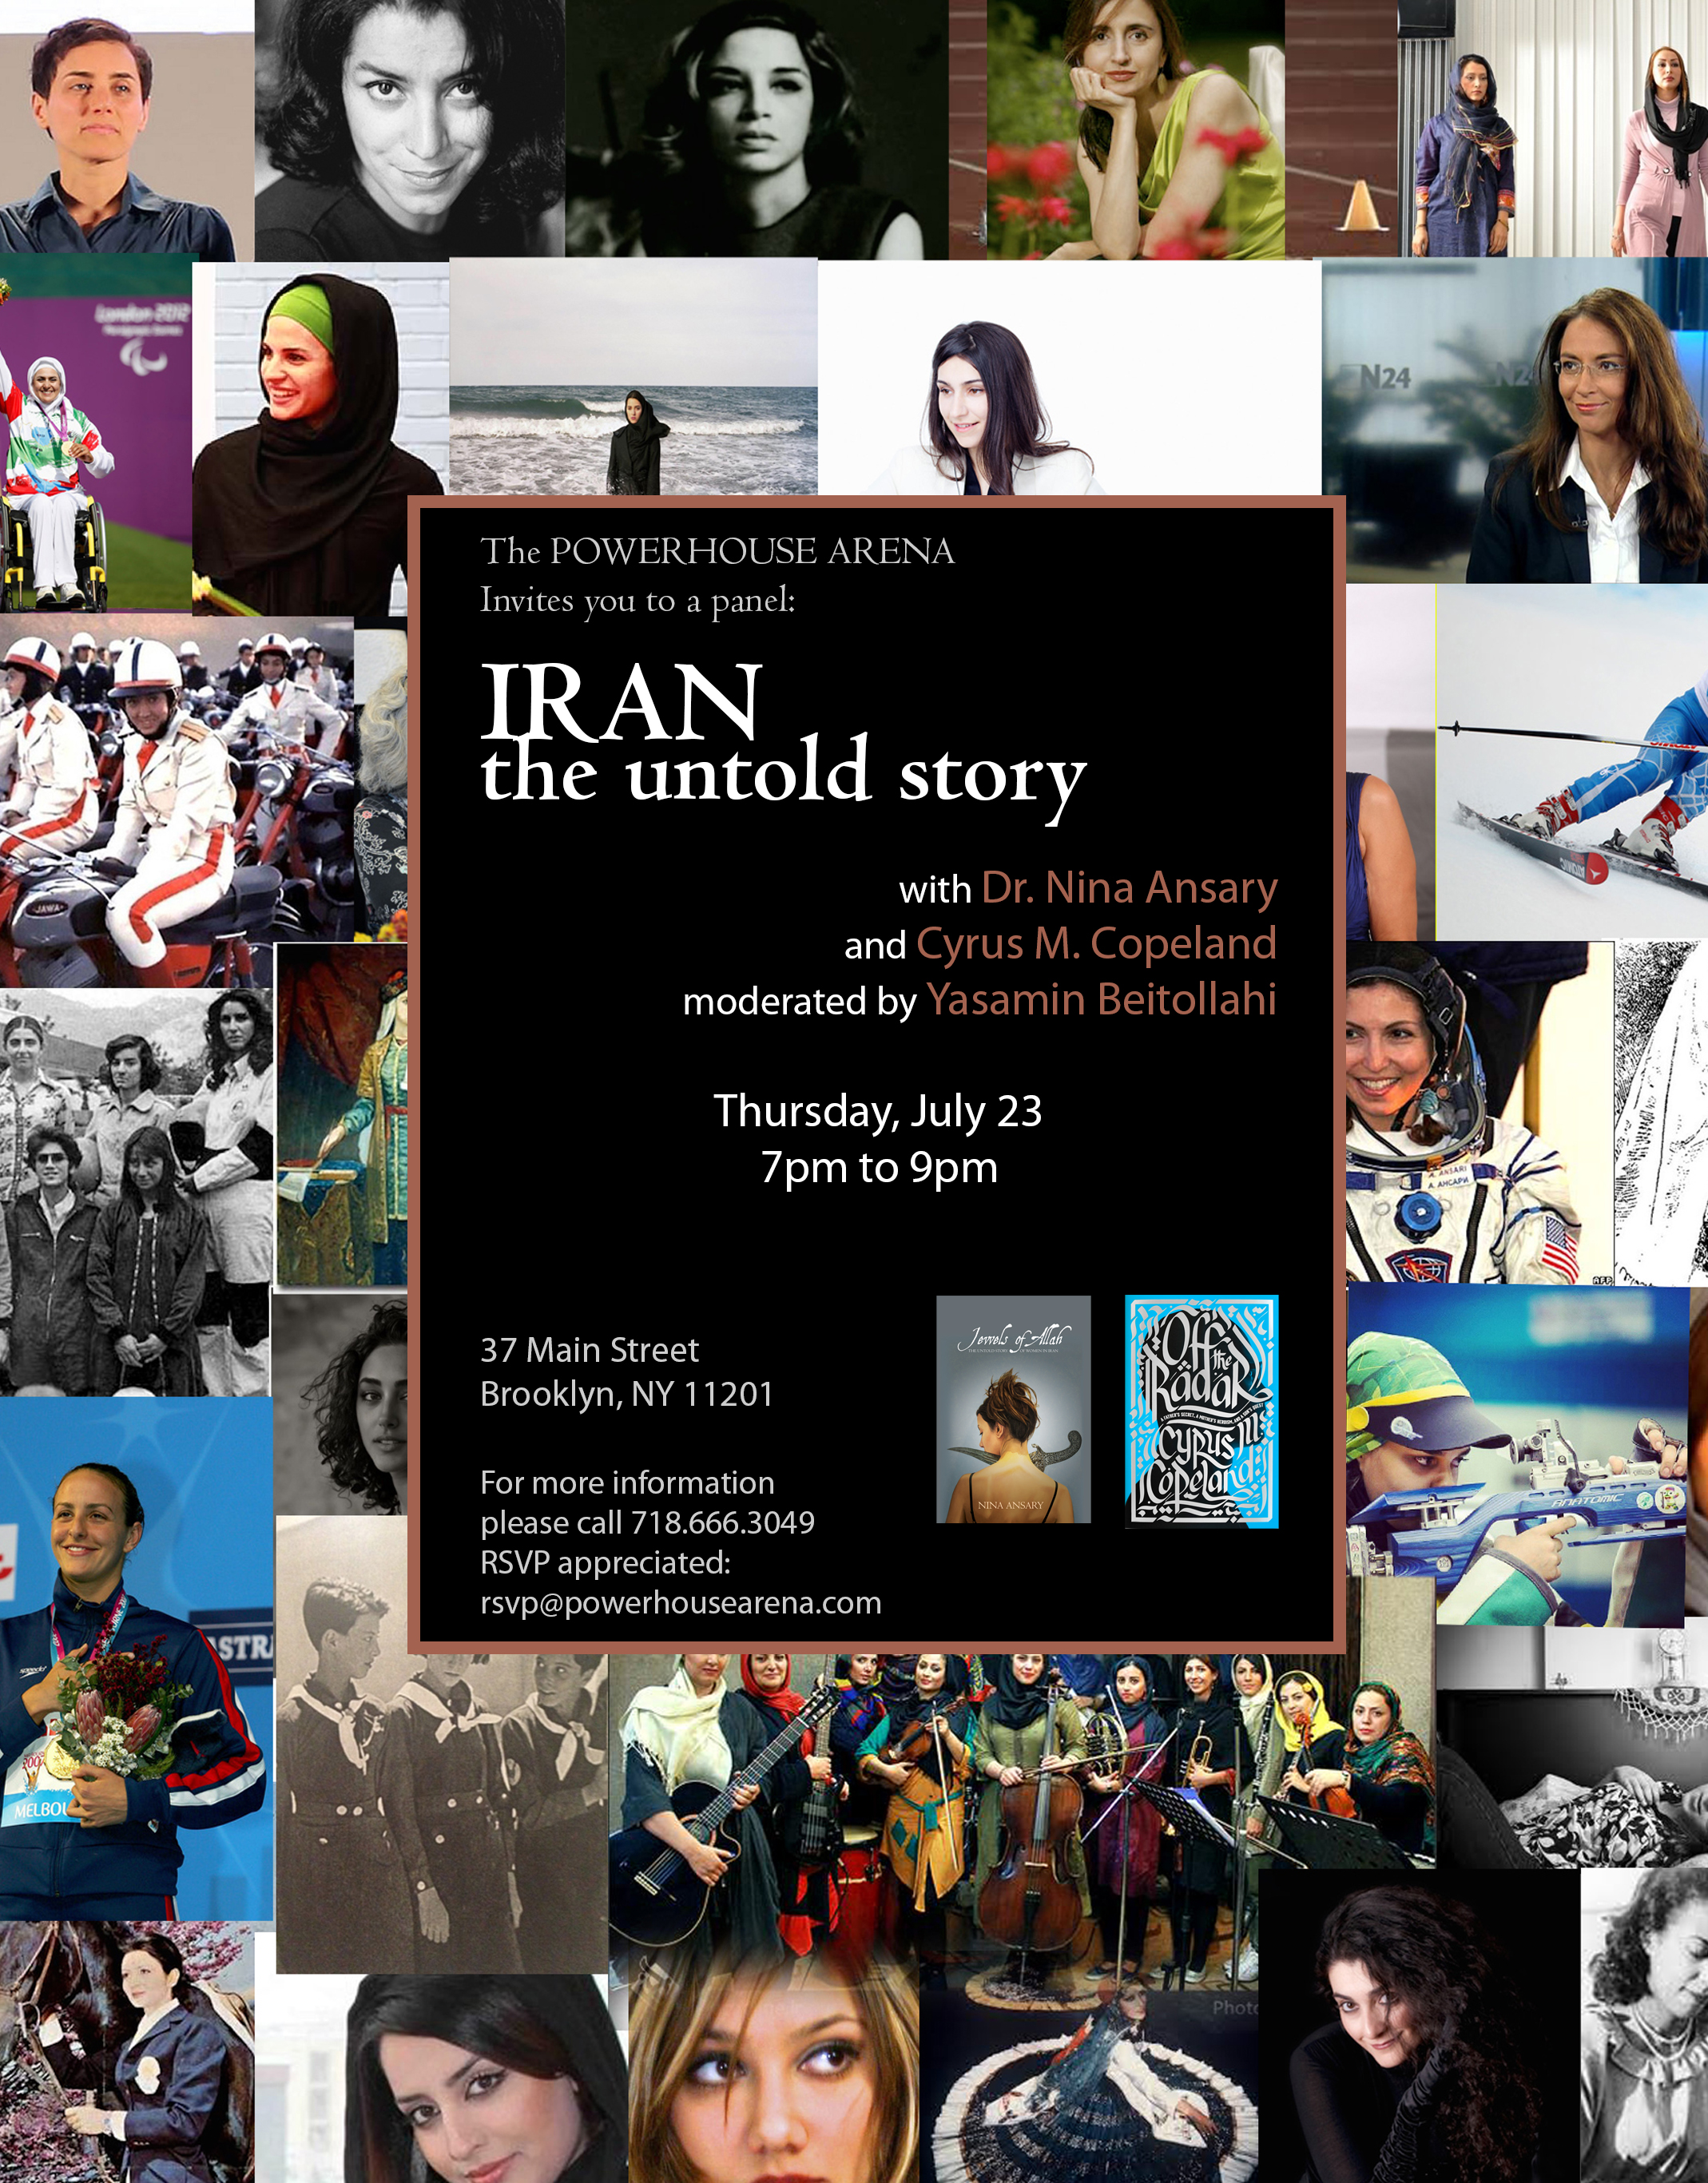 Book Launch and Panel Discussion: Iran – The Untold Story with Dr. Nina Ansary and Cyrus M. Copeland moderated by Yasiman Beitollahi